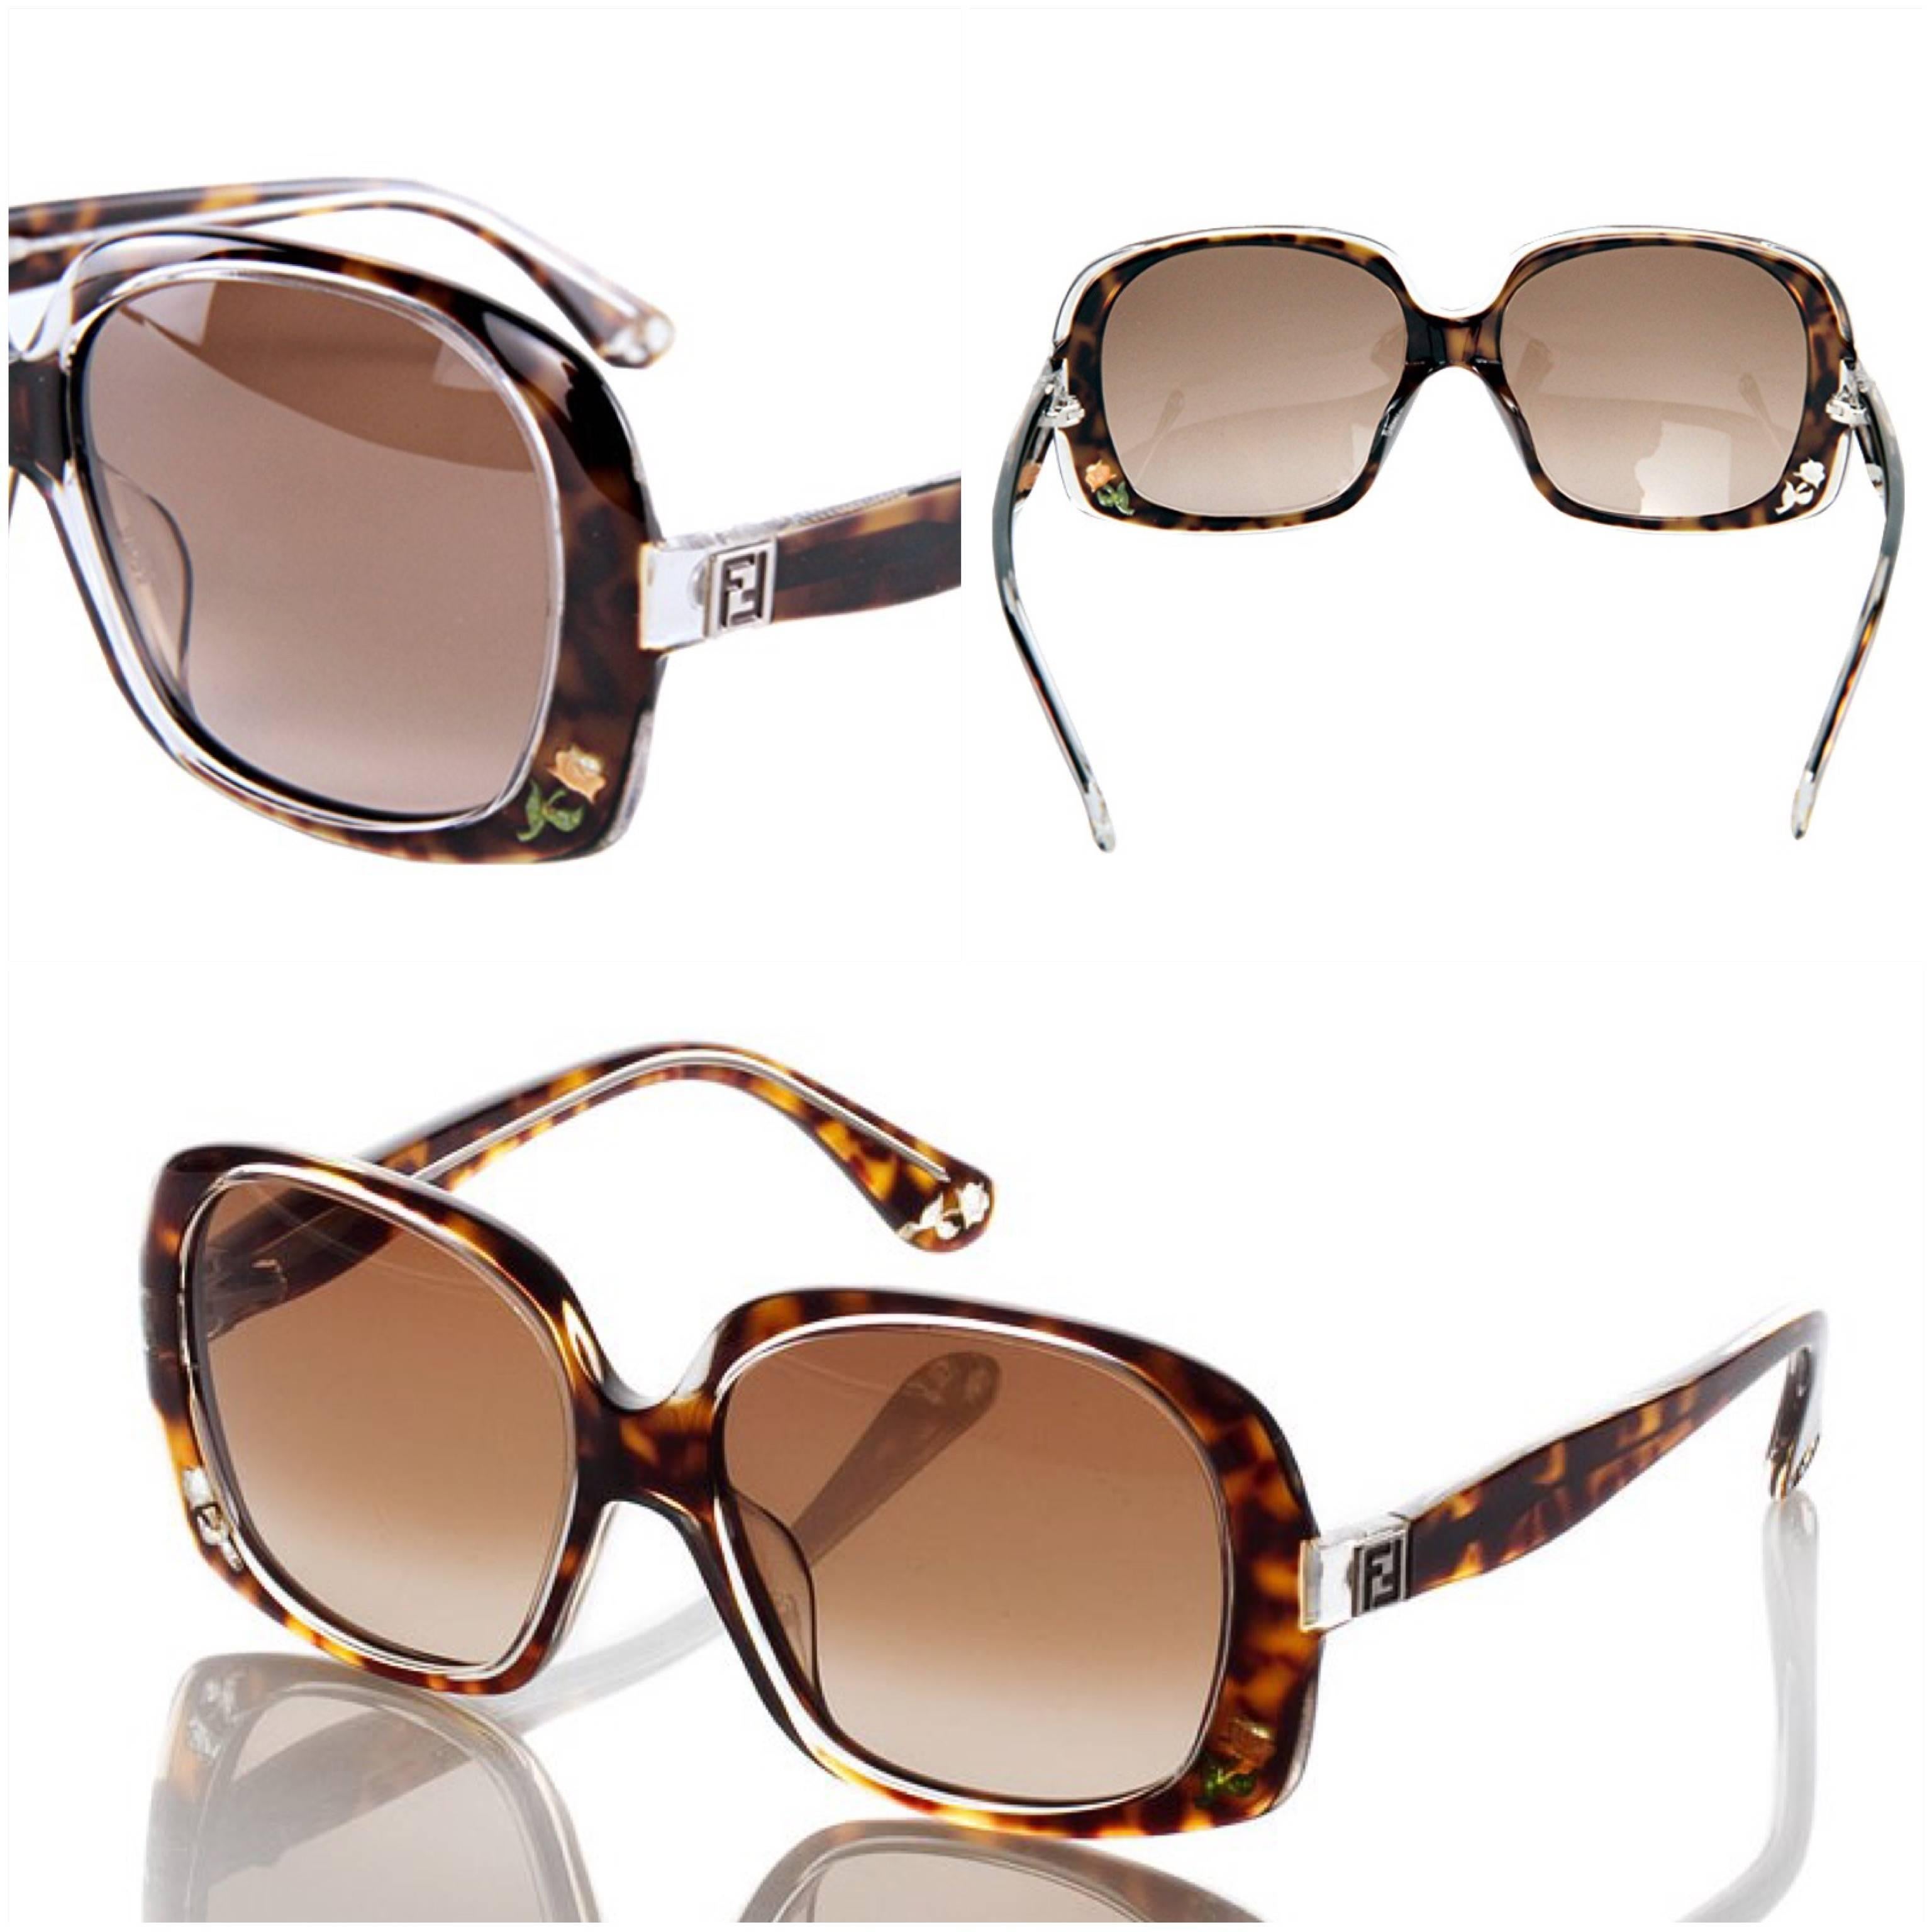  Fendi Rose Sunglasses
Brand New
*Stunning Inlaid Rose Sunglasses
* Tortoise Front & Interior
* Inlaid Rose Detail on the Front & Sides
* Seen on MANY Stars
* FF Details on Temples
* Made in Italy
* 100% UVA/UVB Protection
* Comes with Case &